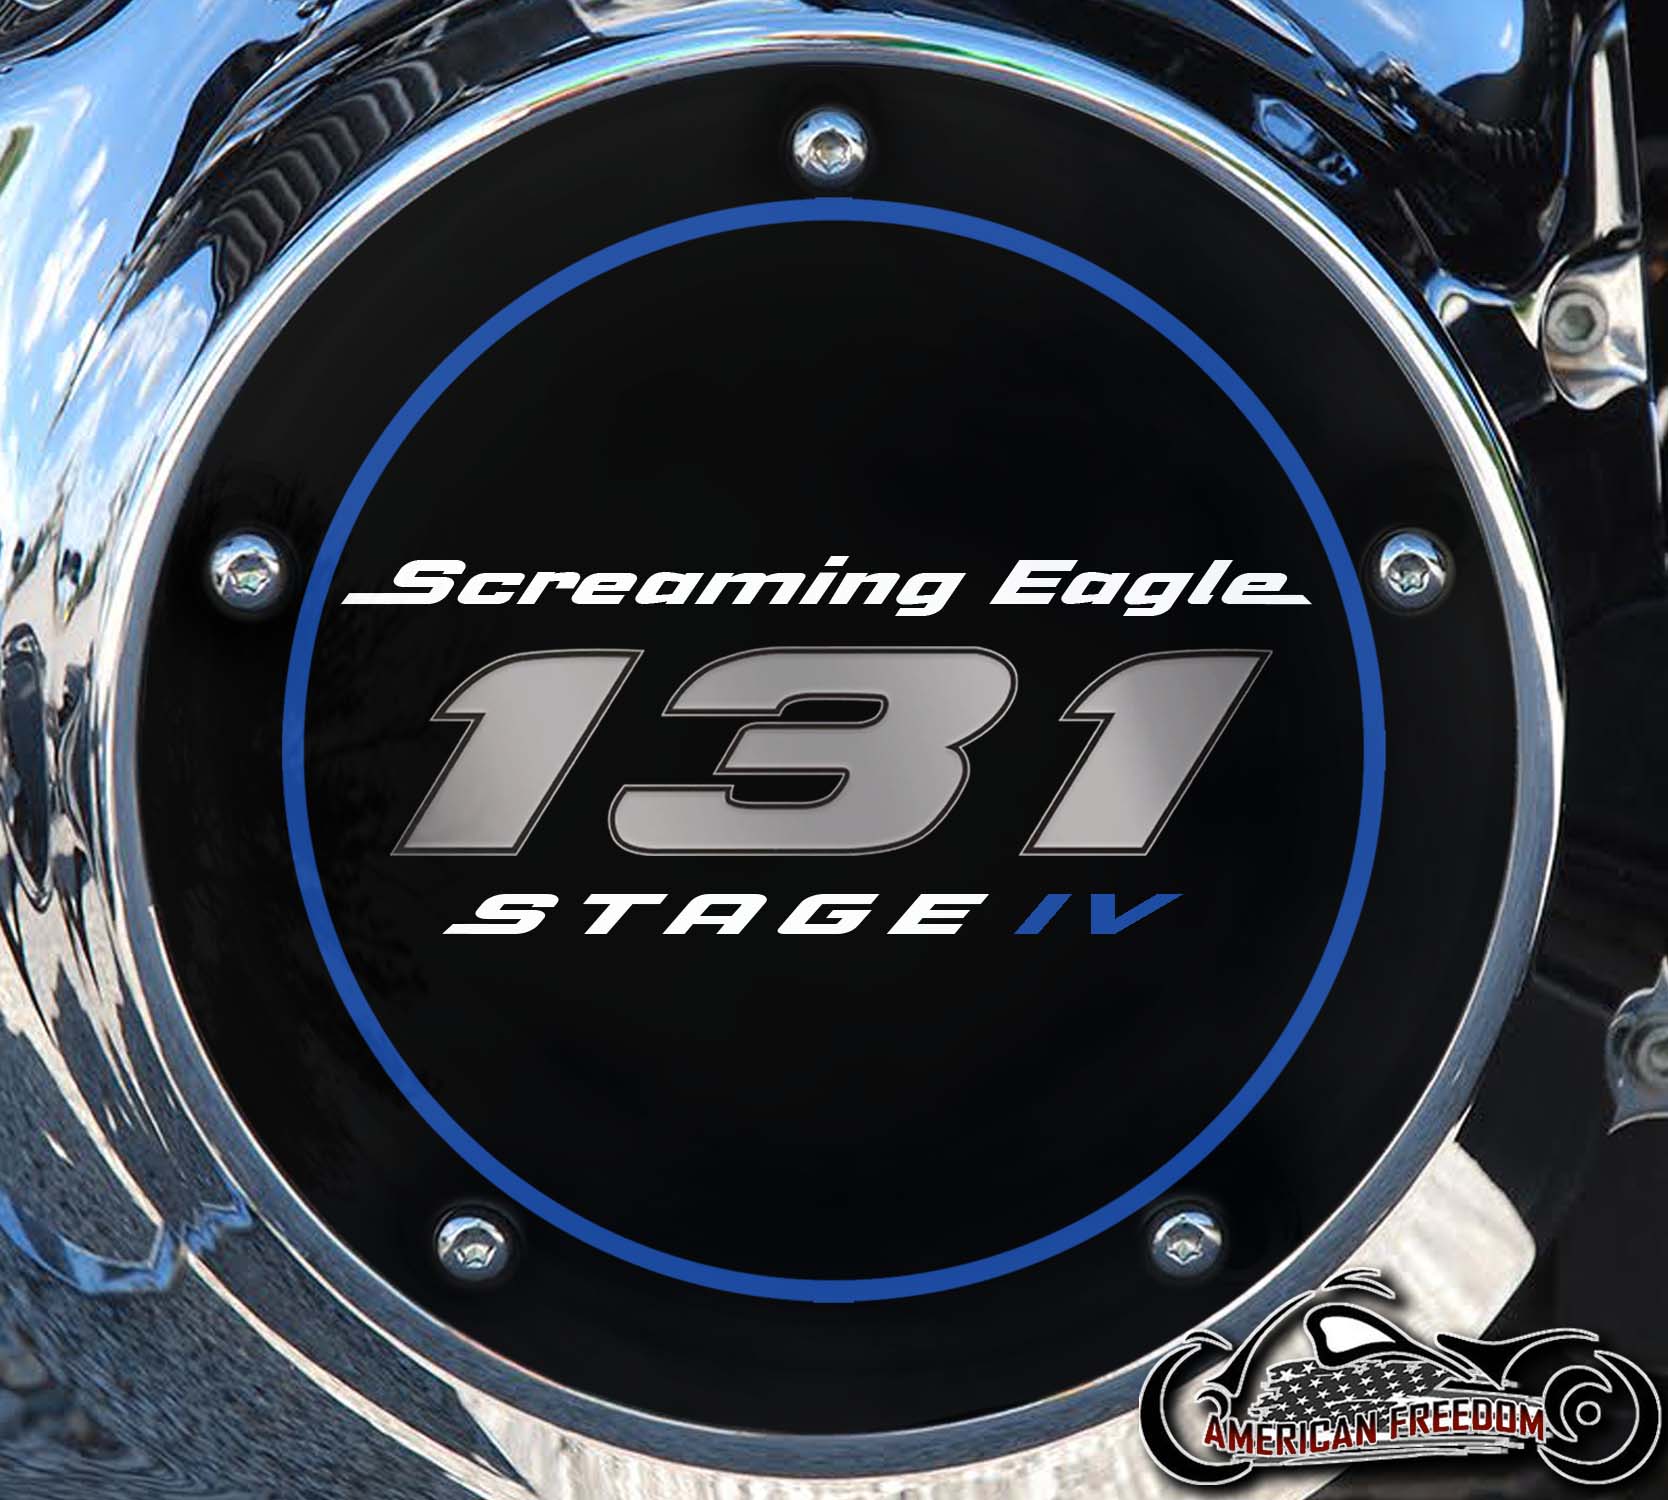 Screaming Eagle Stage IV 131 Derby cover "Blue"